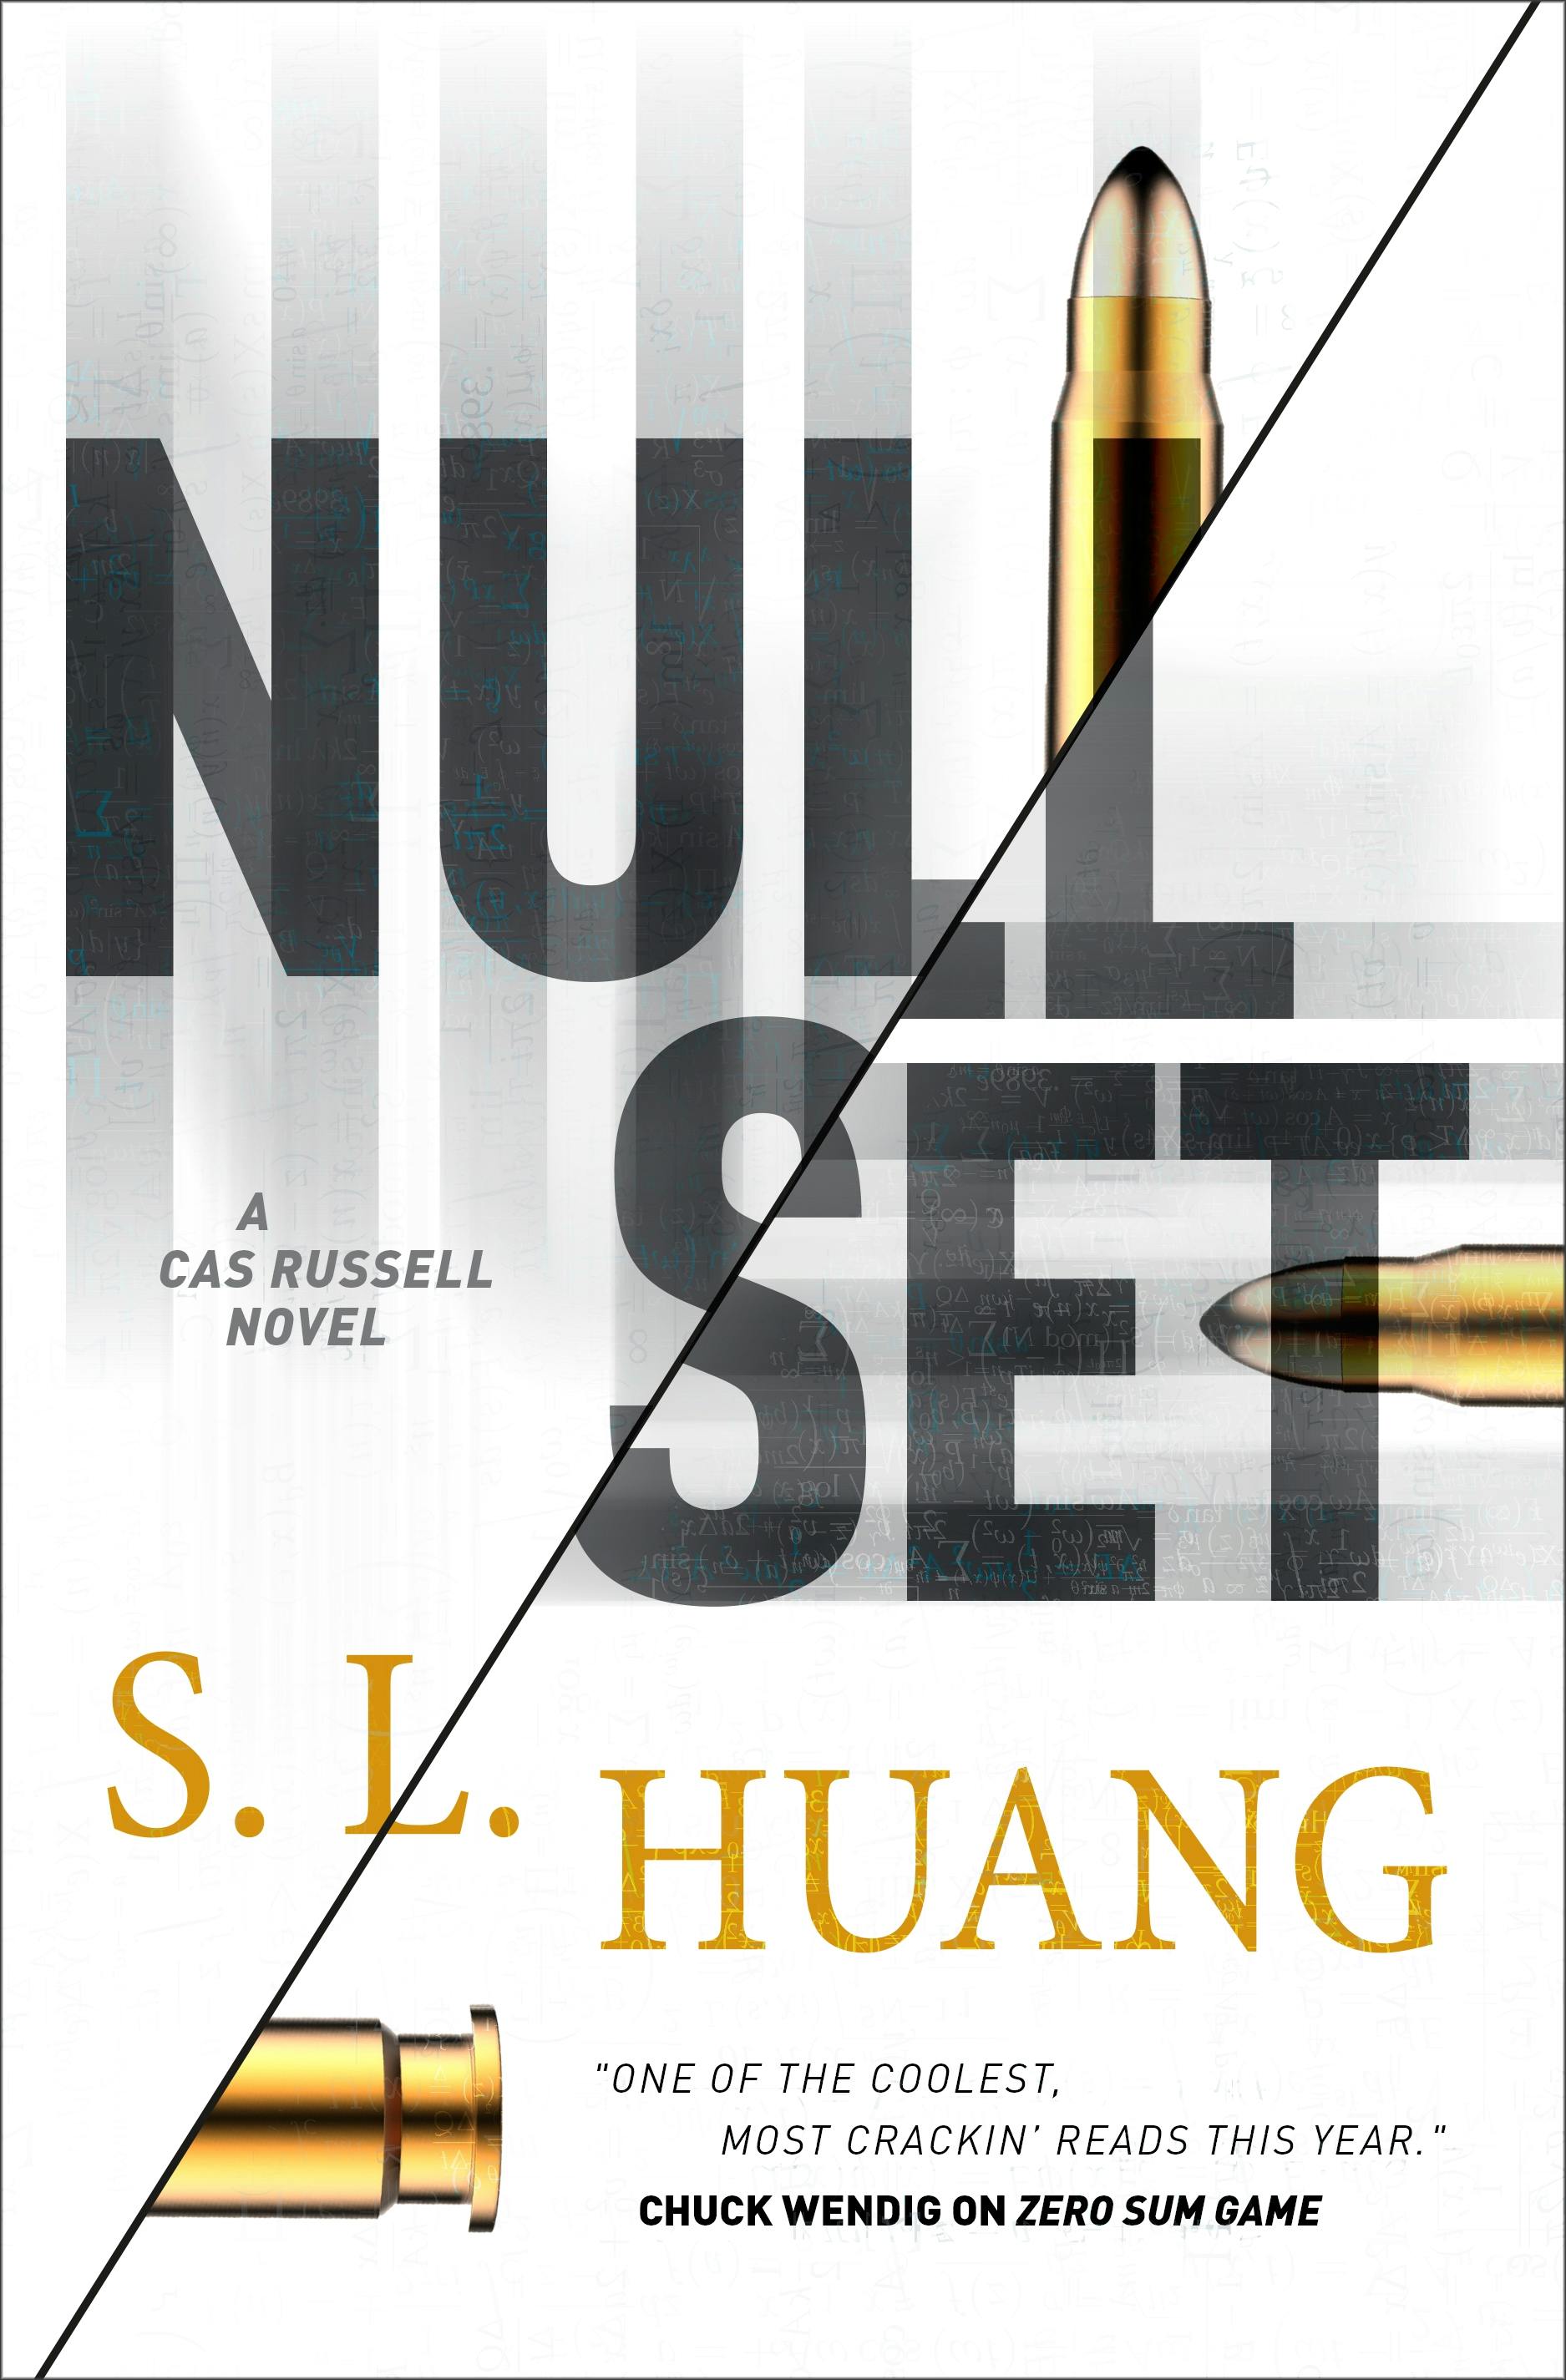 Cover for the book titled as: Null Set